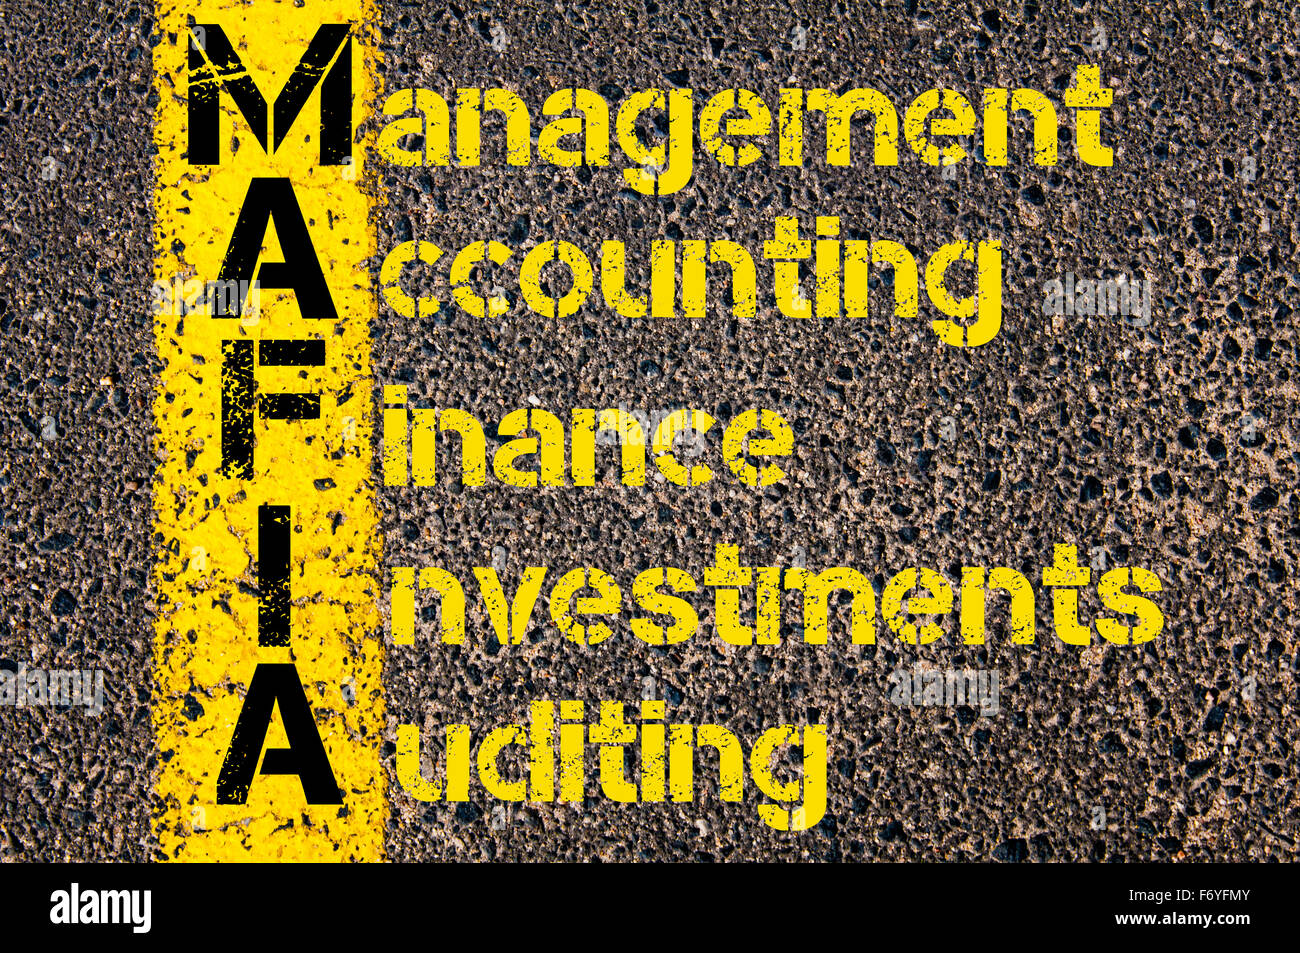 Concept image of Business Acronym MAFIA as Management Accounting Finance Investments And Auditing written over road marking yellow paint line. Stock Photo